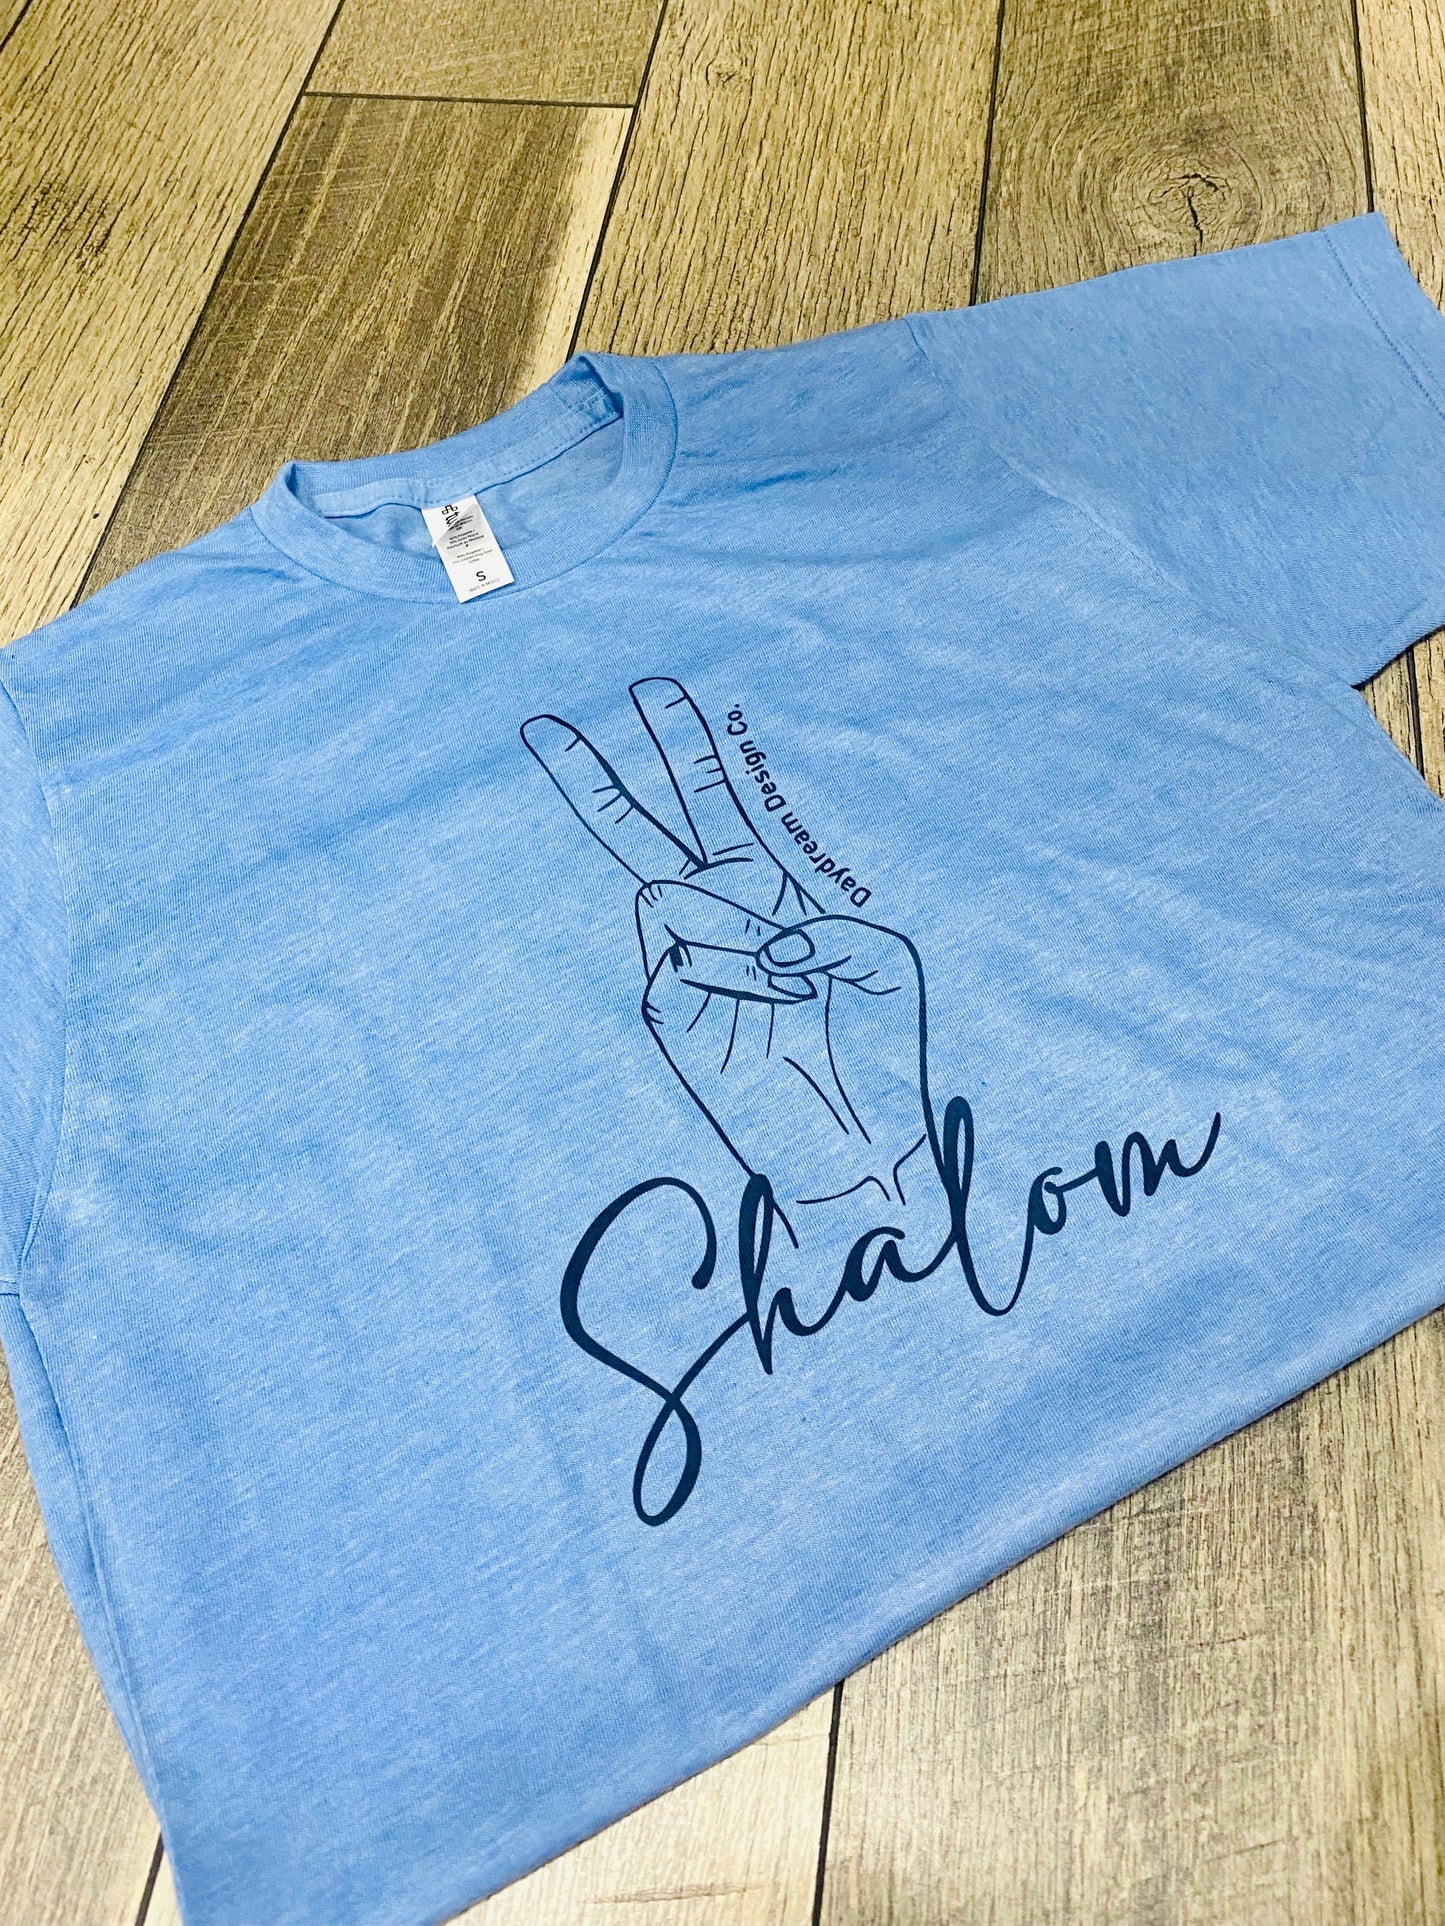 Shalom T-Shirt in Heather Athletic Blue by Daydream Design Co.